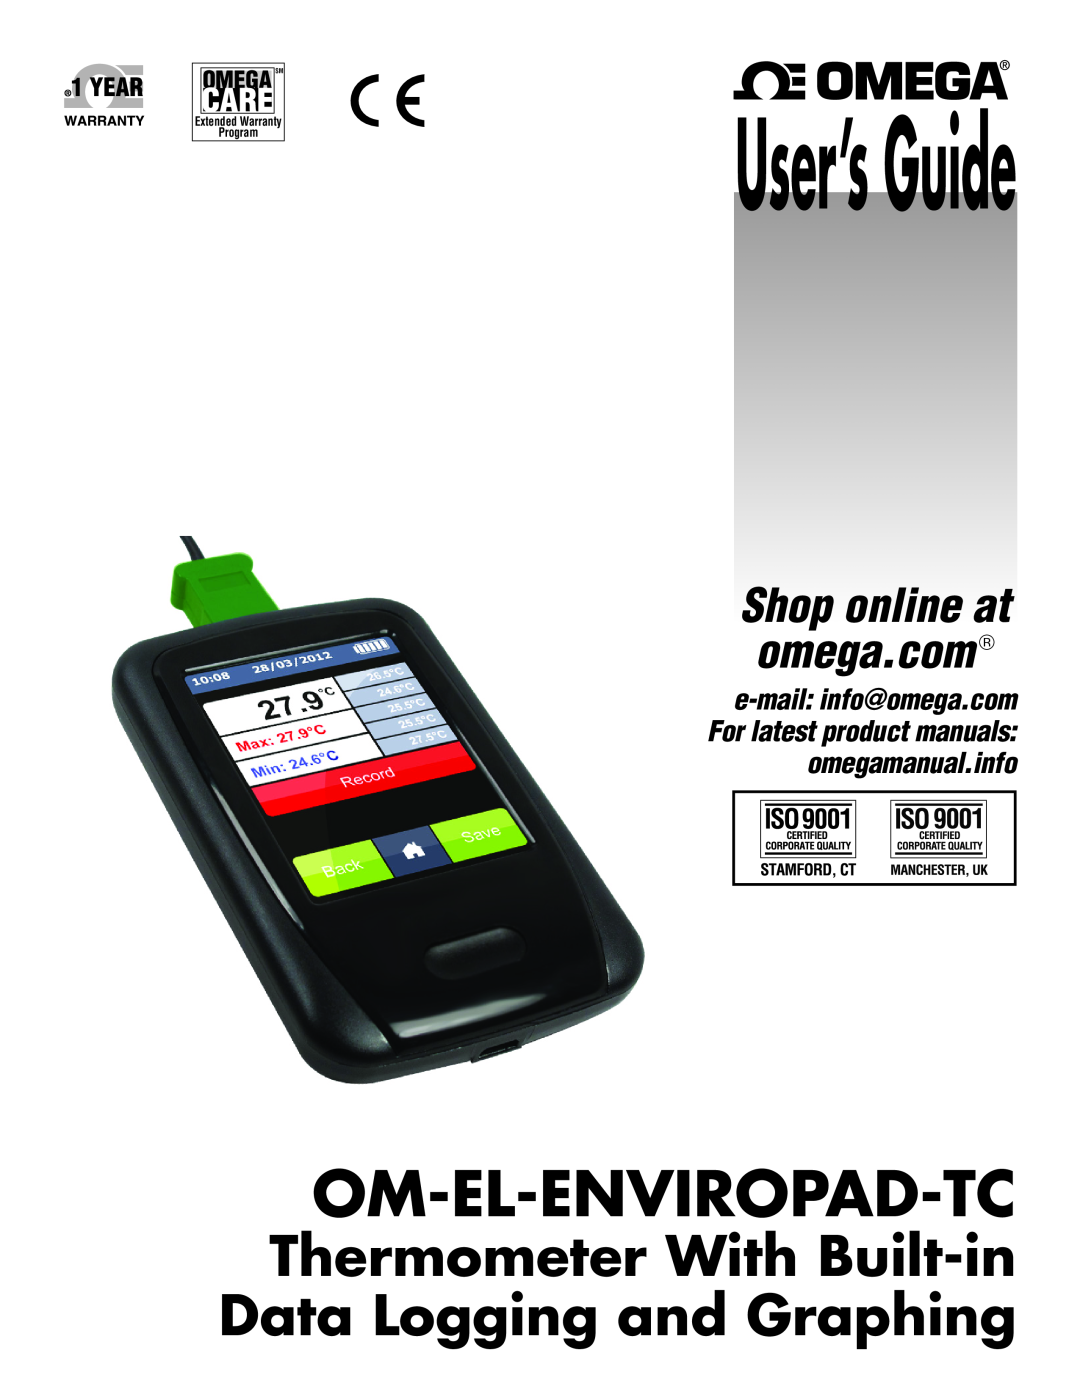 Omega OM-EL-ENVIROPAD-TC warranty Om-El-Enviropad-Tc, Thermometer With Built-in Data Logging and Graphing, Program 